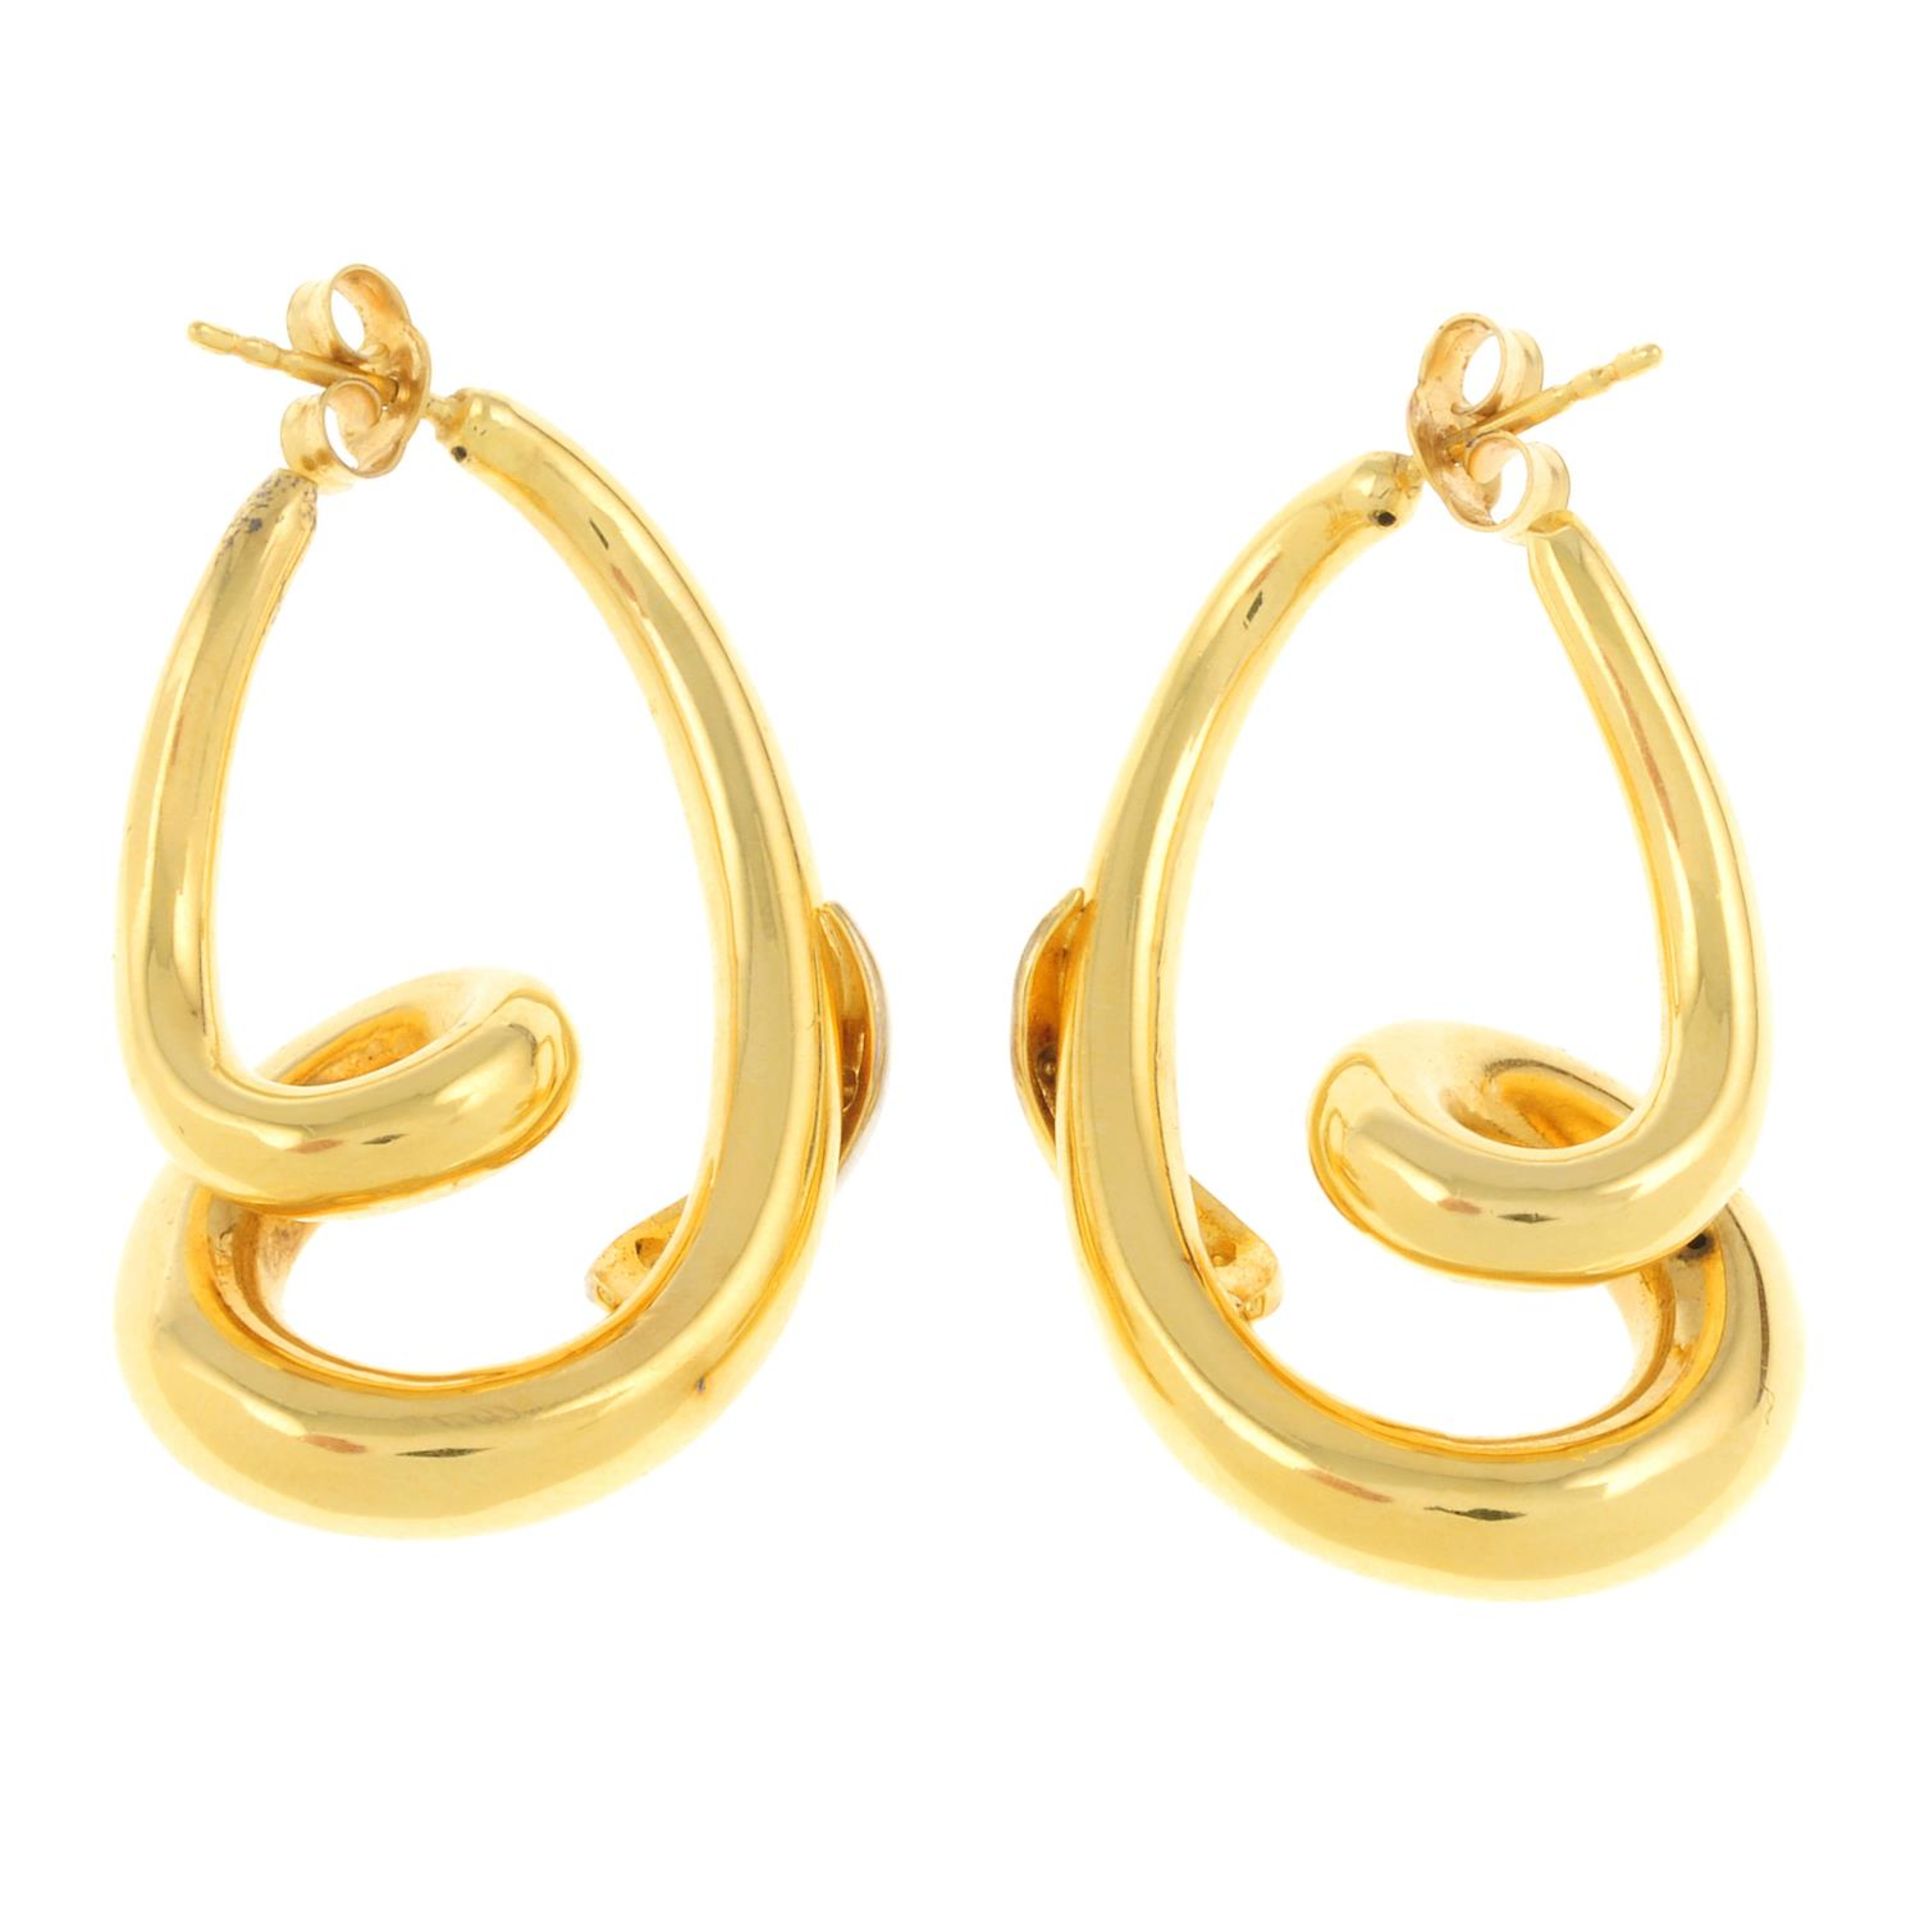 A pair of spiral earrings, with diamond accents. - Image 2 of 2